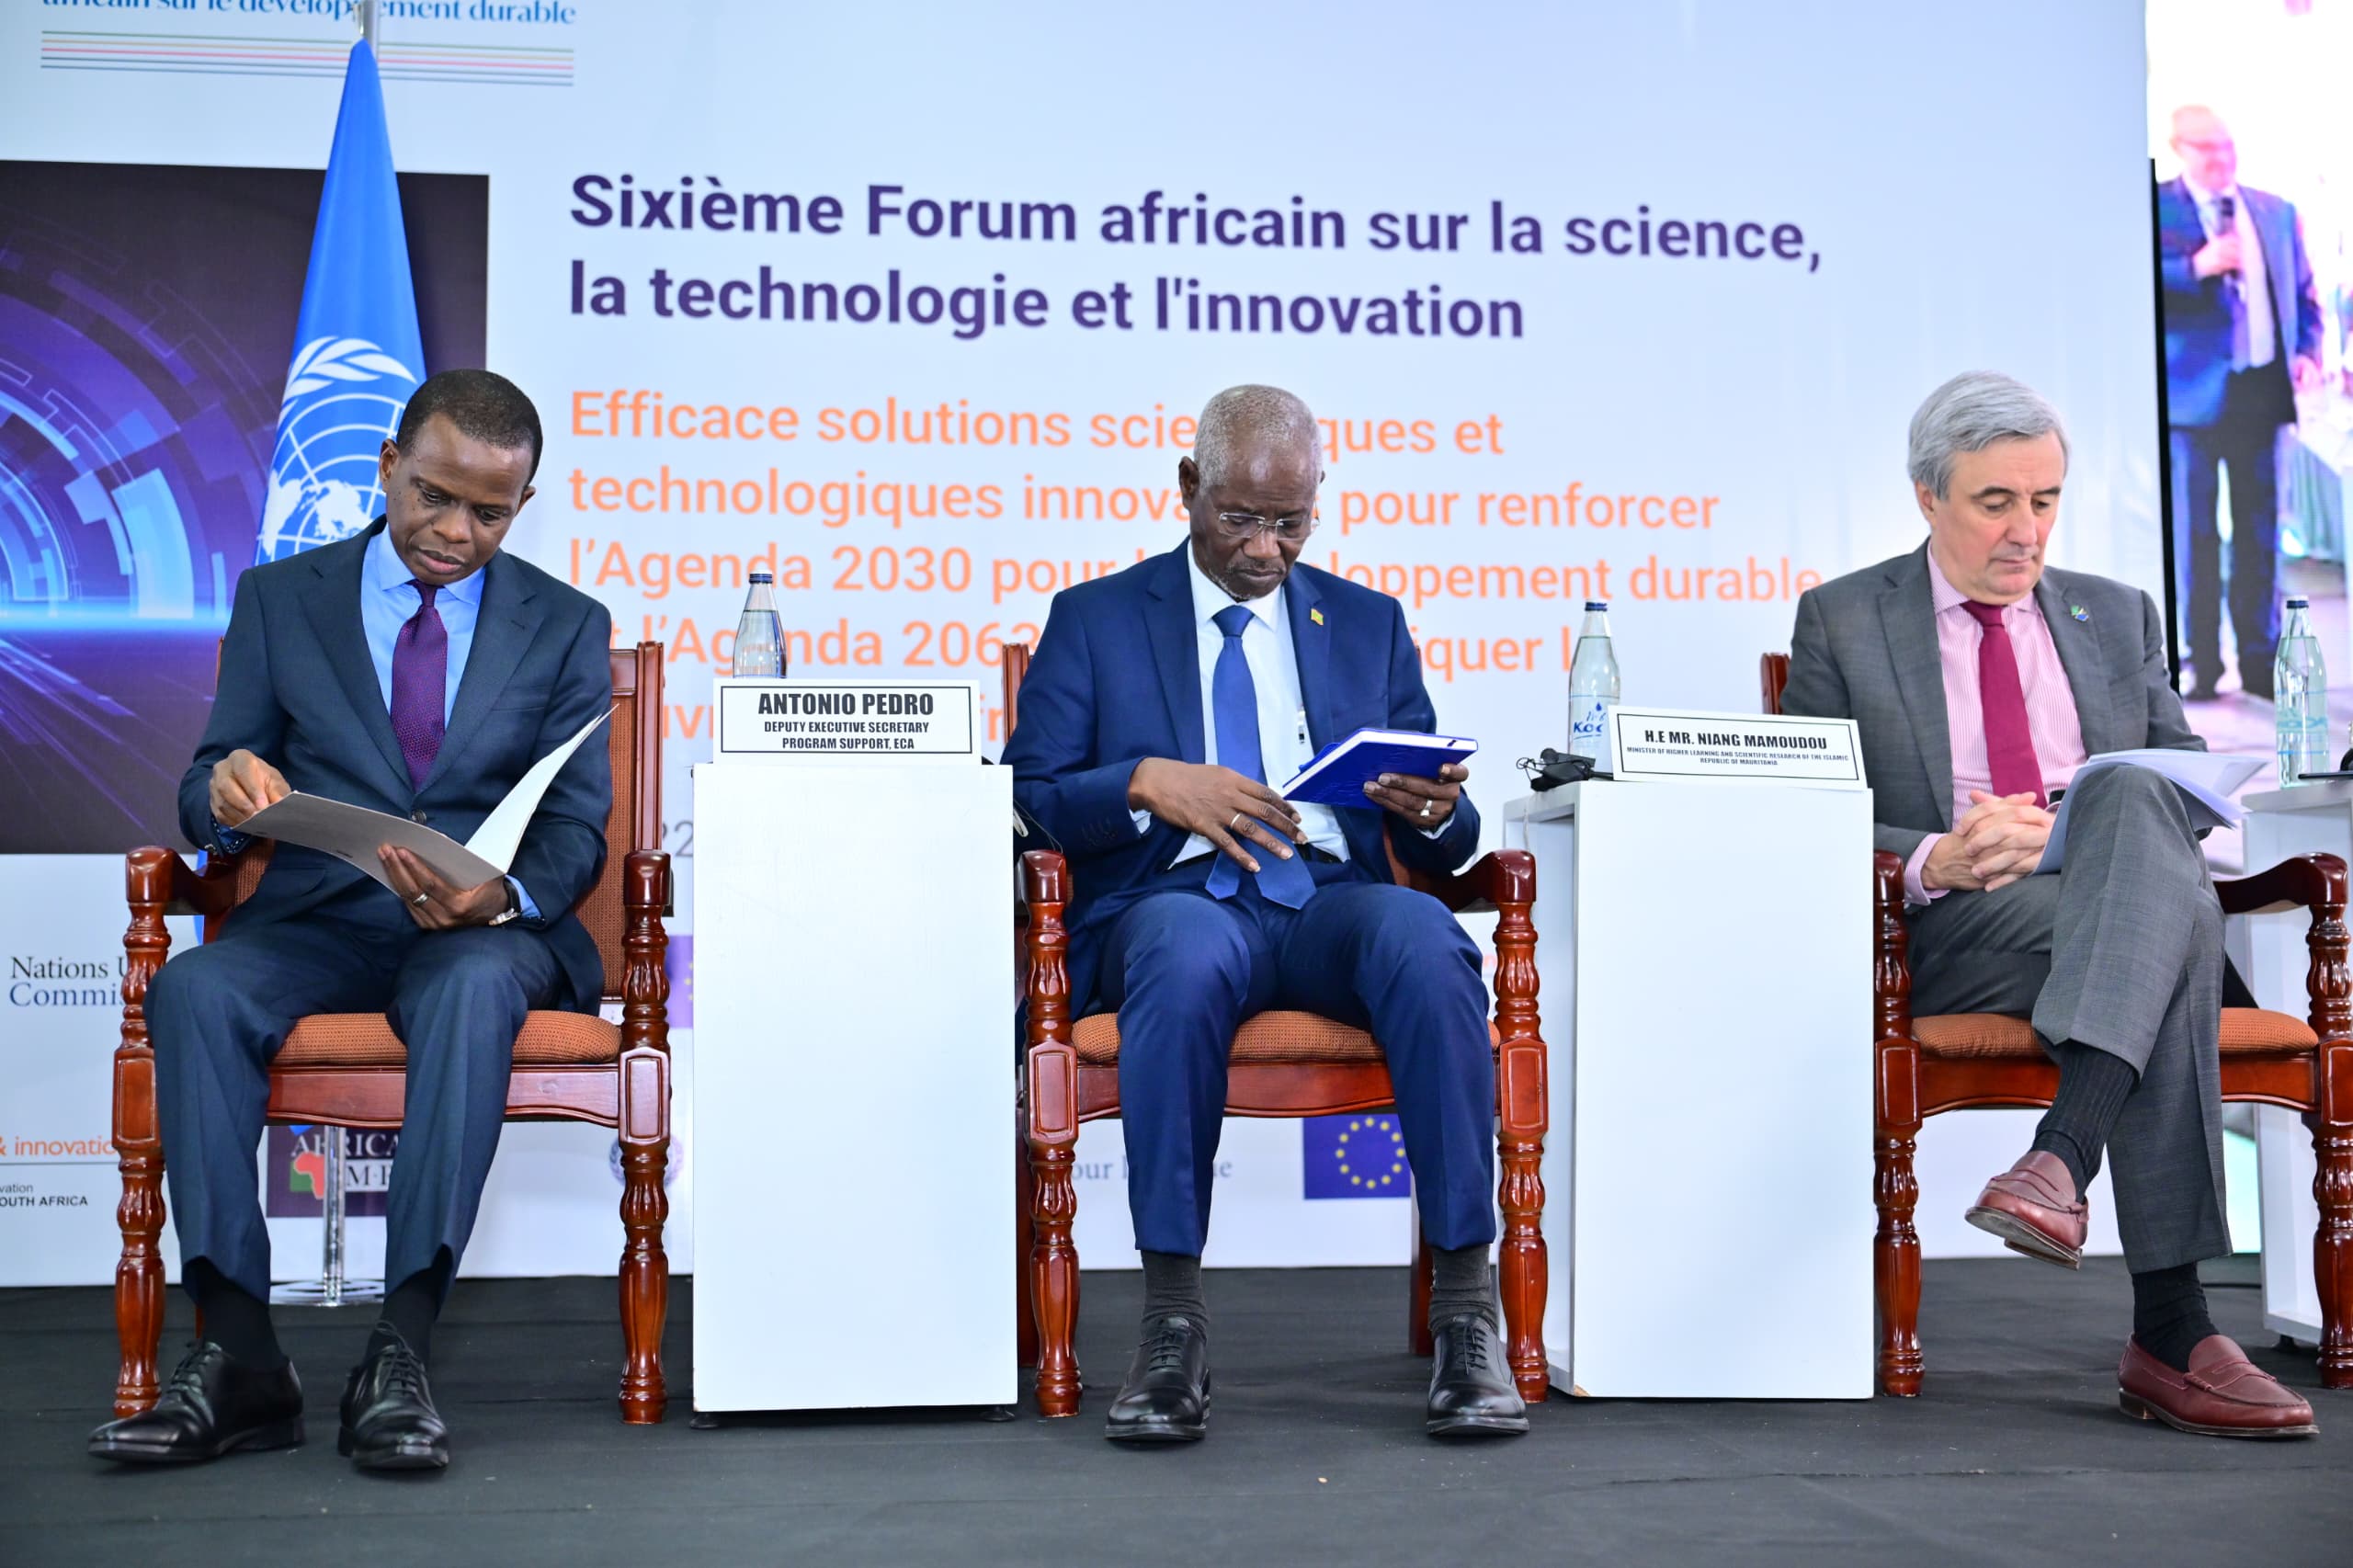 6th African Science, Technology and Innovation Forum in pictures